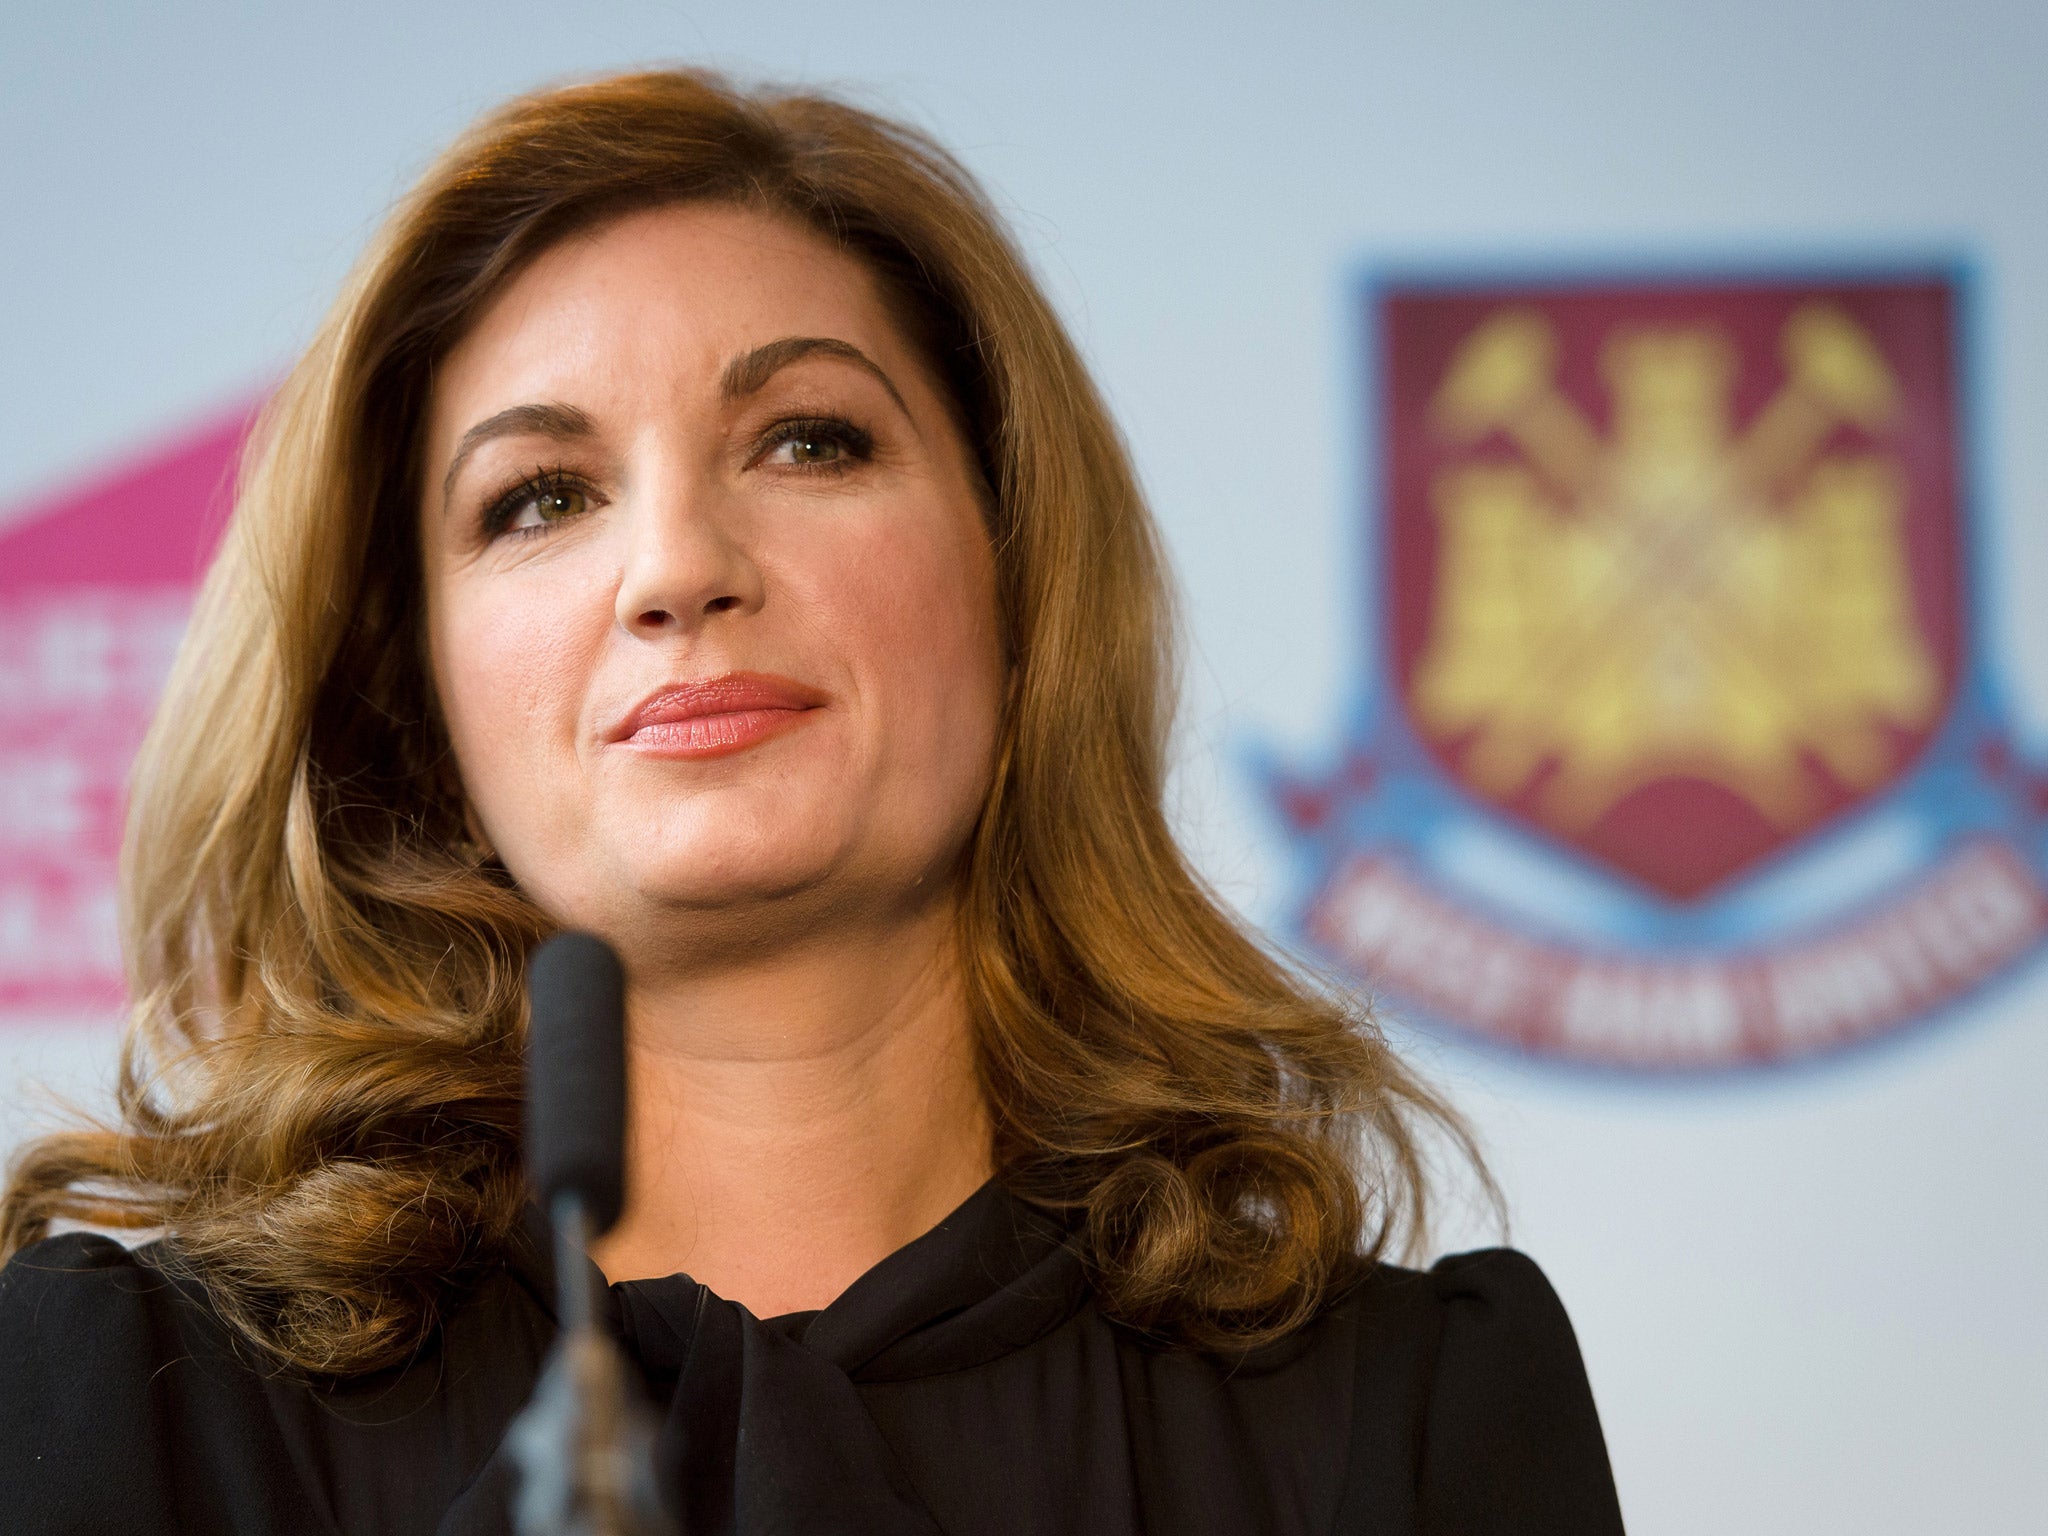 Running your own business is the most rewarding job, says Karren Brady